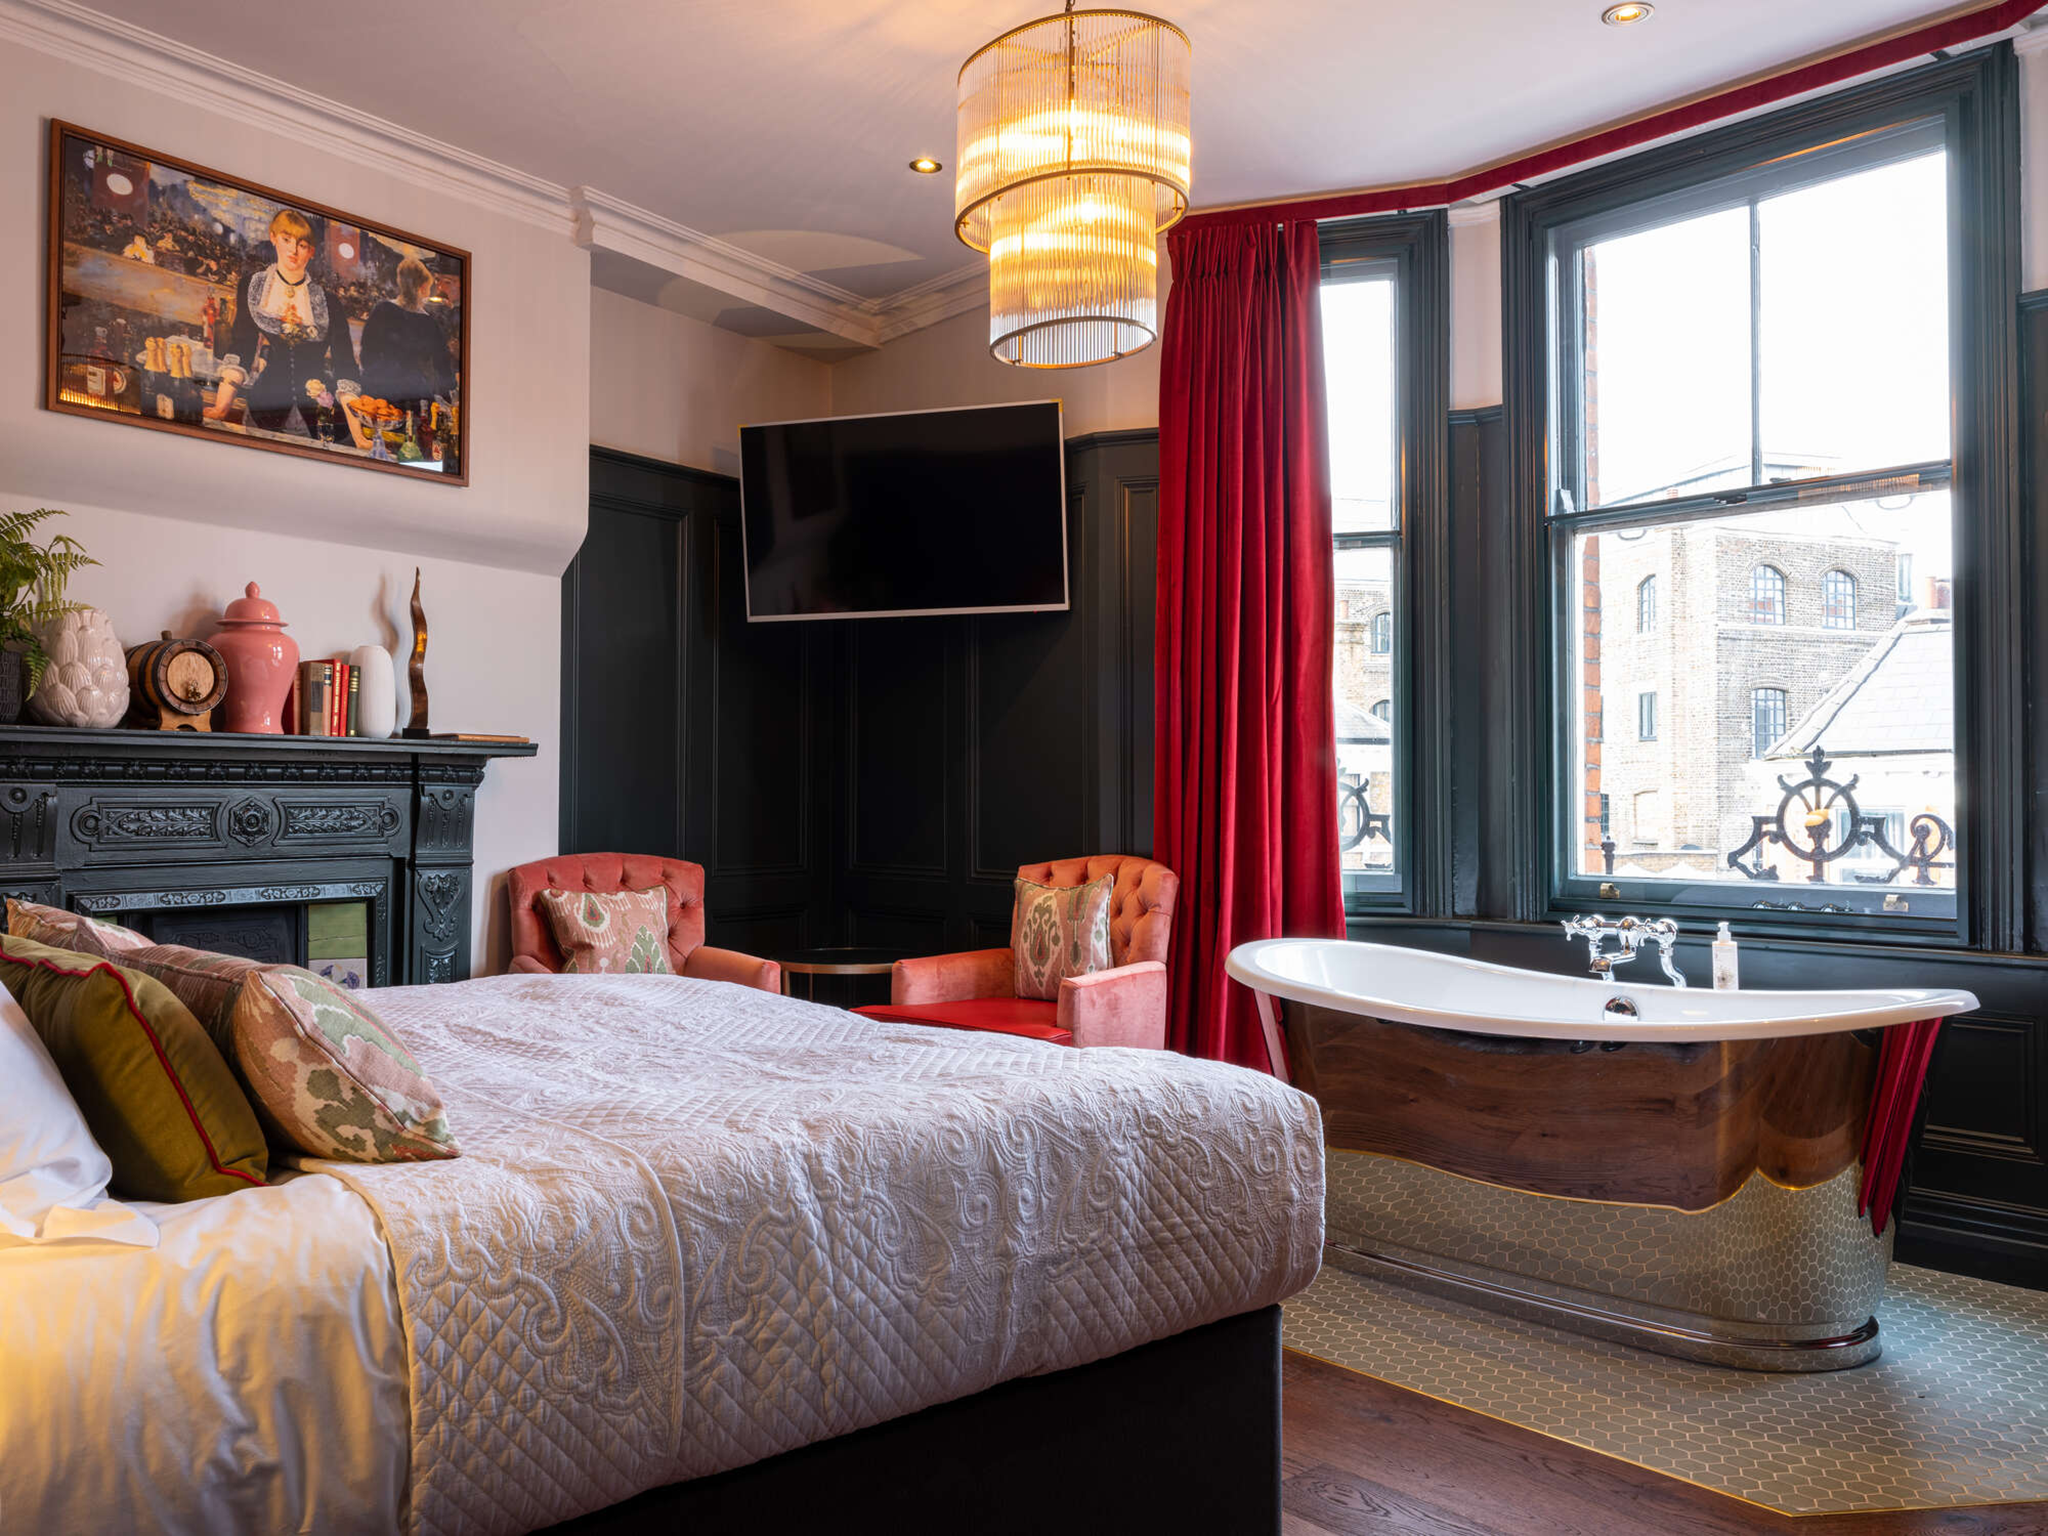 The Nespresso machines and curated mini bars complement the beautiful bedrooms